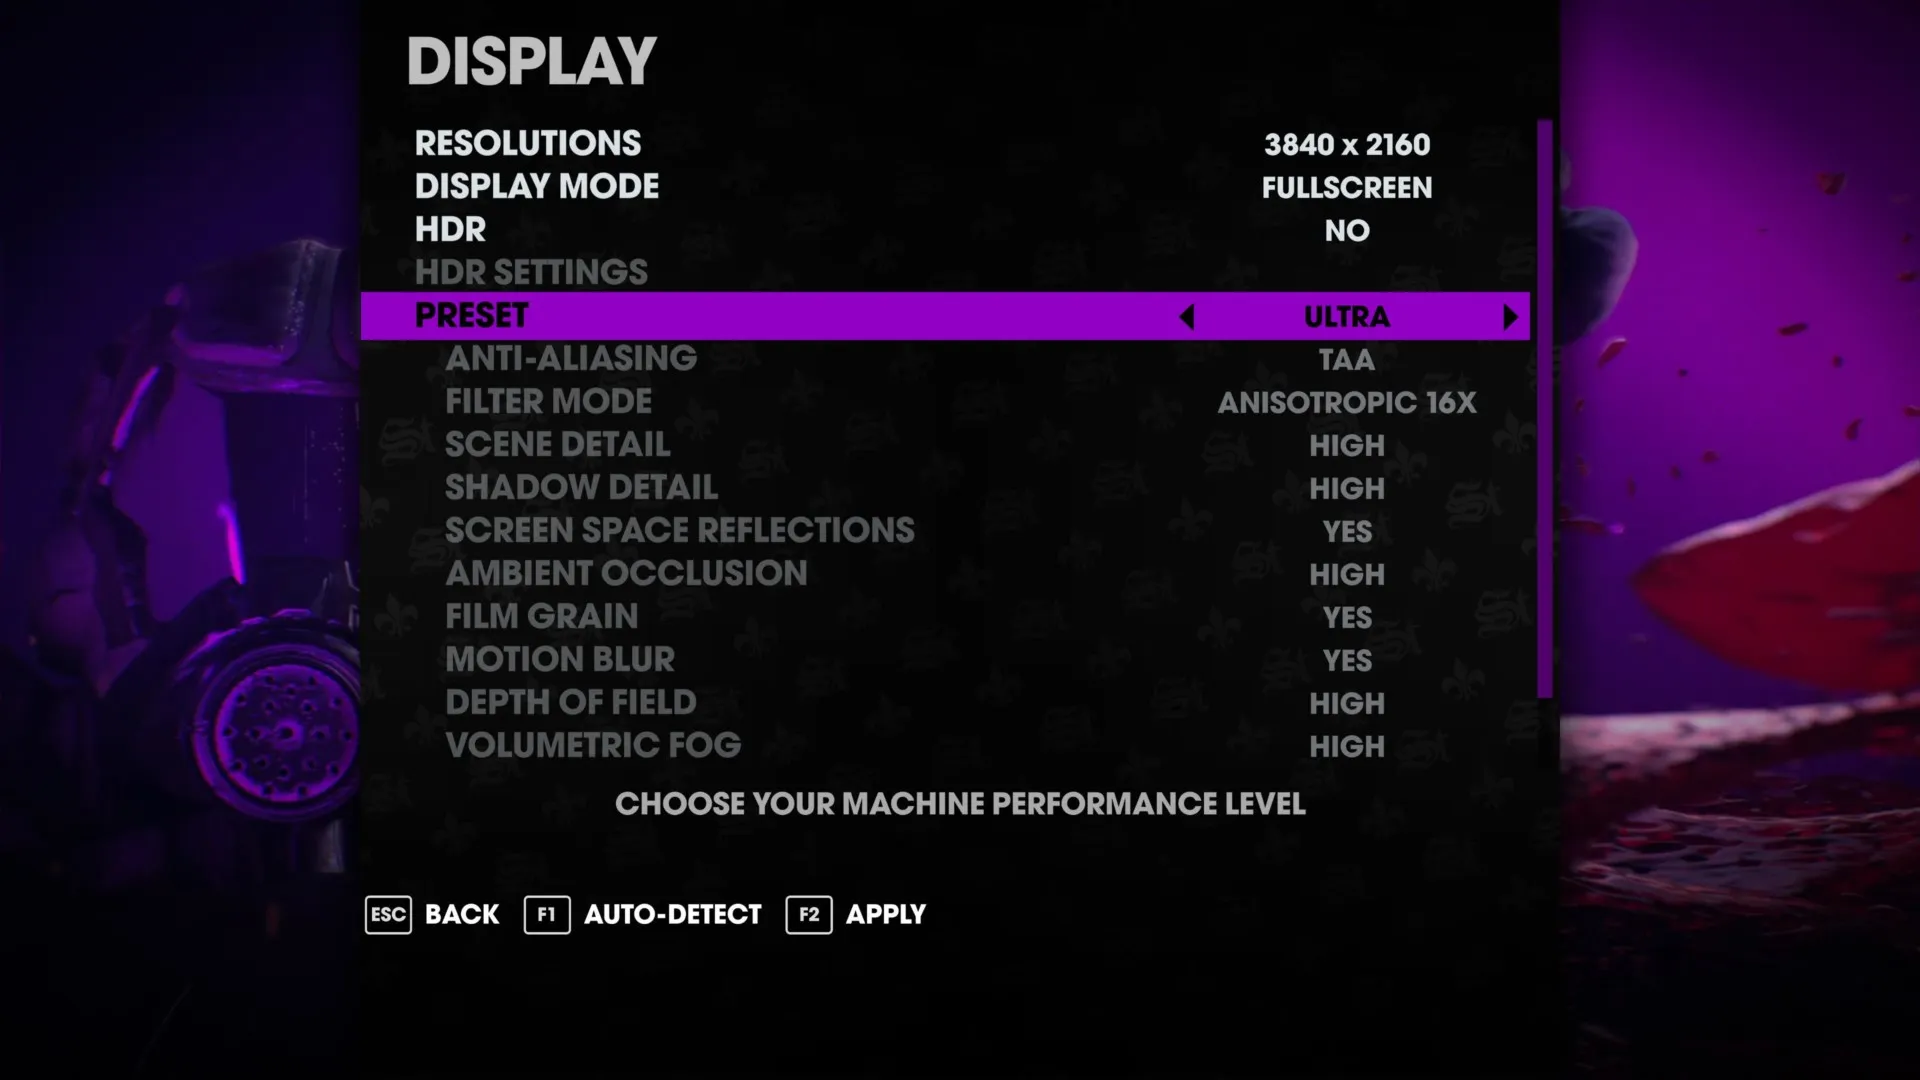 Saints Row: The Third Remastered system requirements